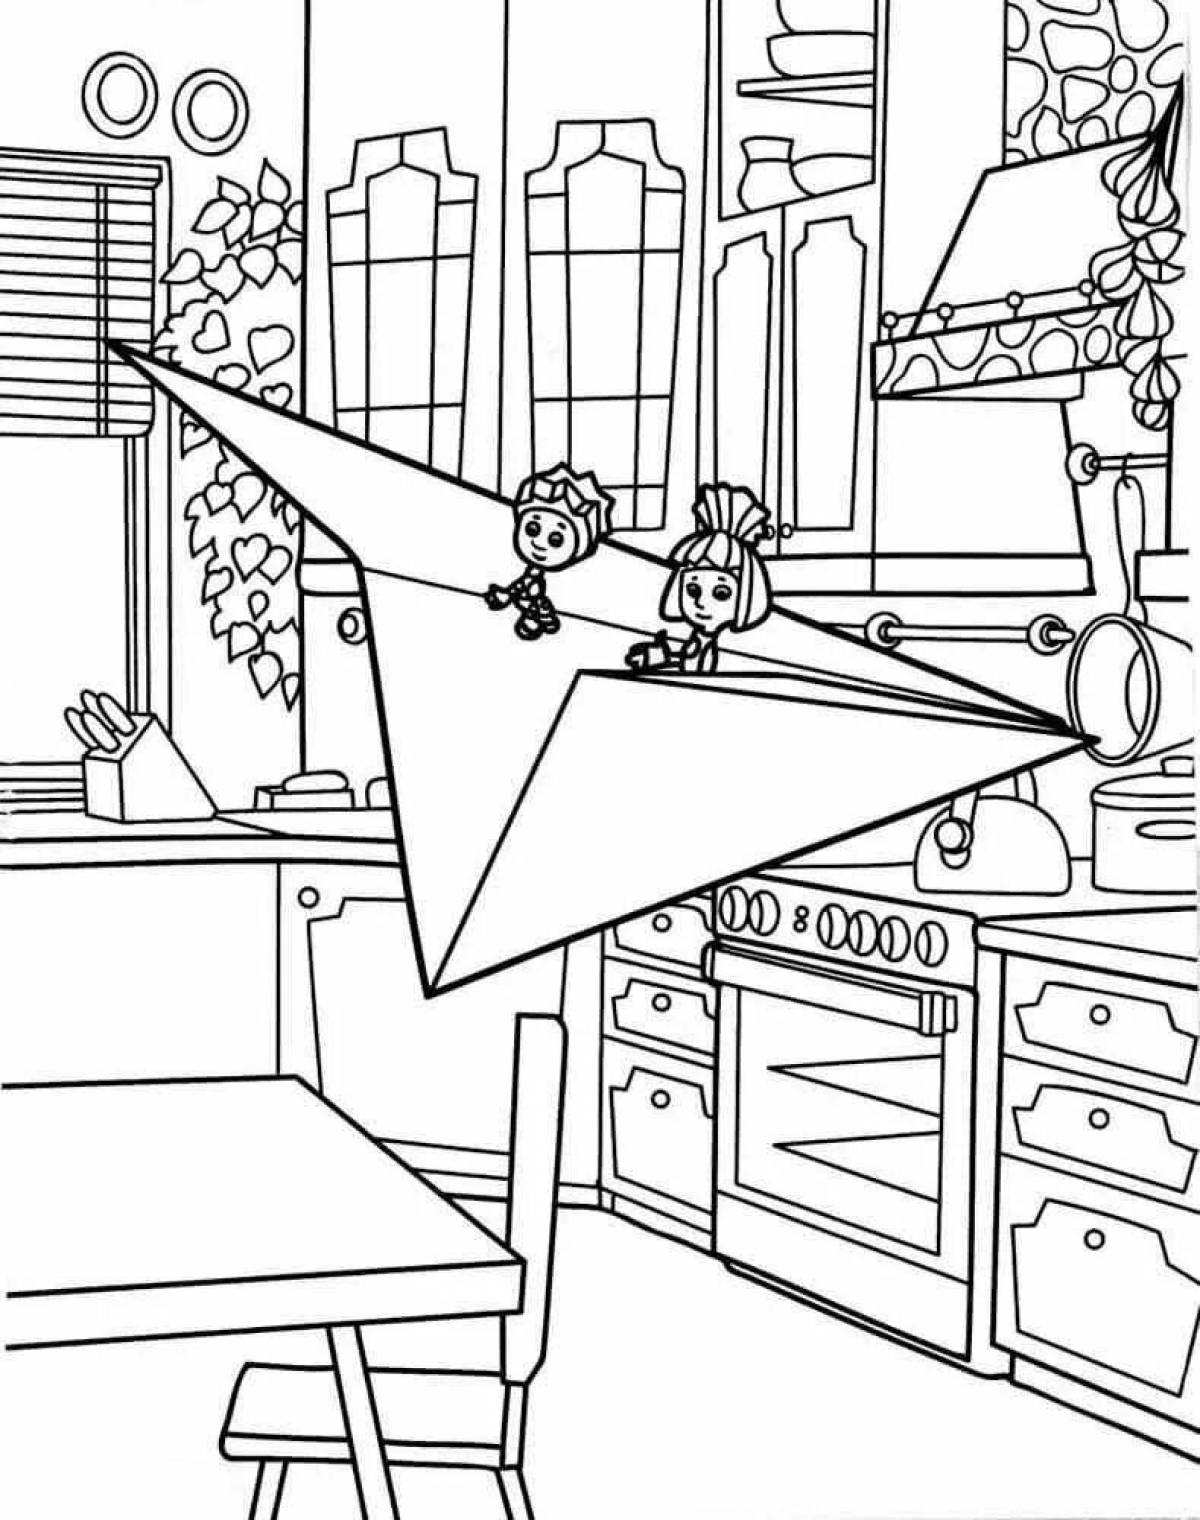 Festive wire cutter coloring page